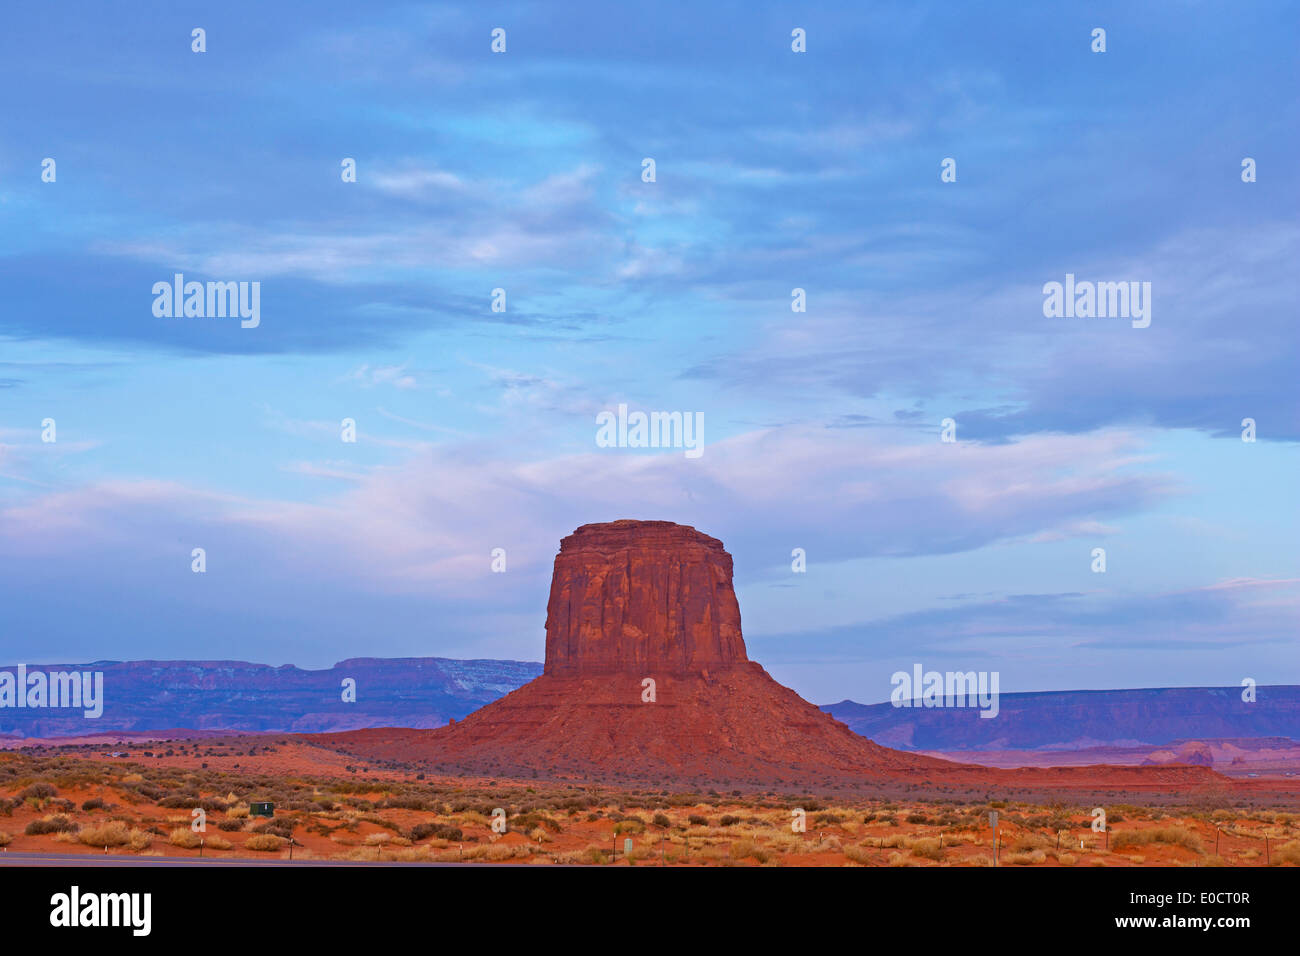 Butte in Monument Valley under clouded sky, Navajo Tribal Park, Navajo Indian Reservation, Arizona, USA, America Stock Photo